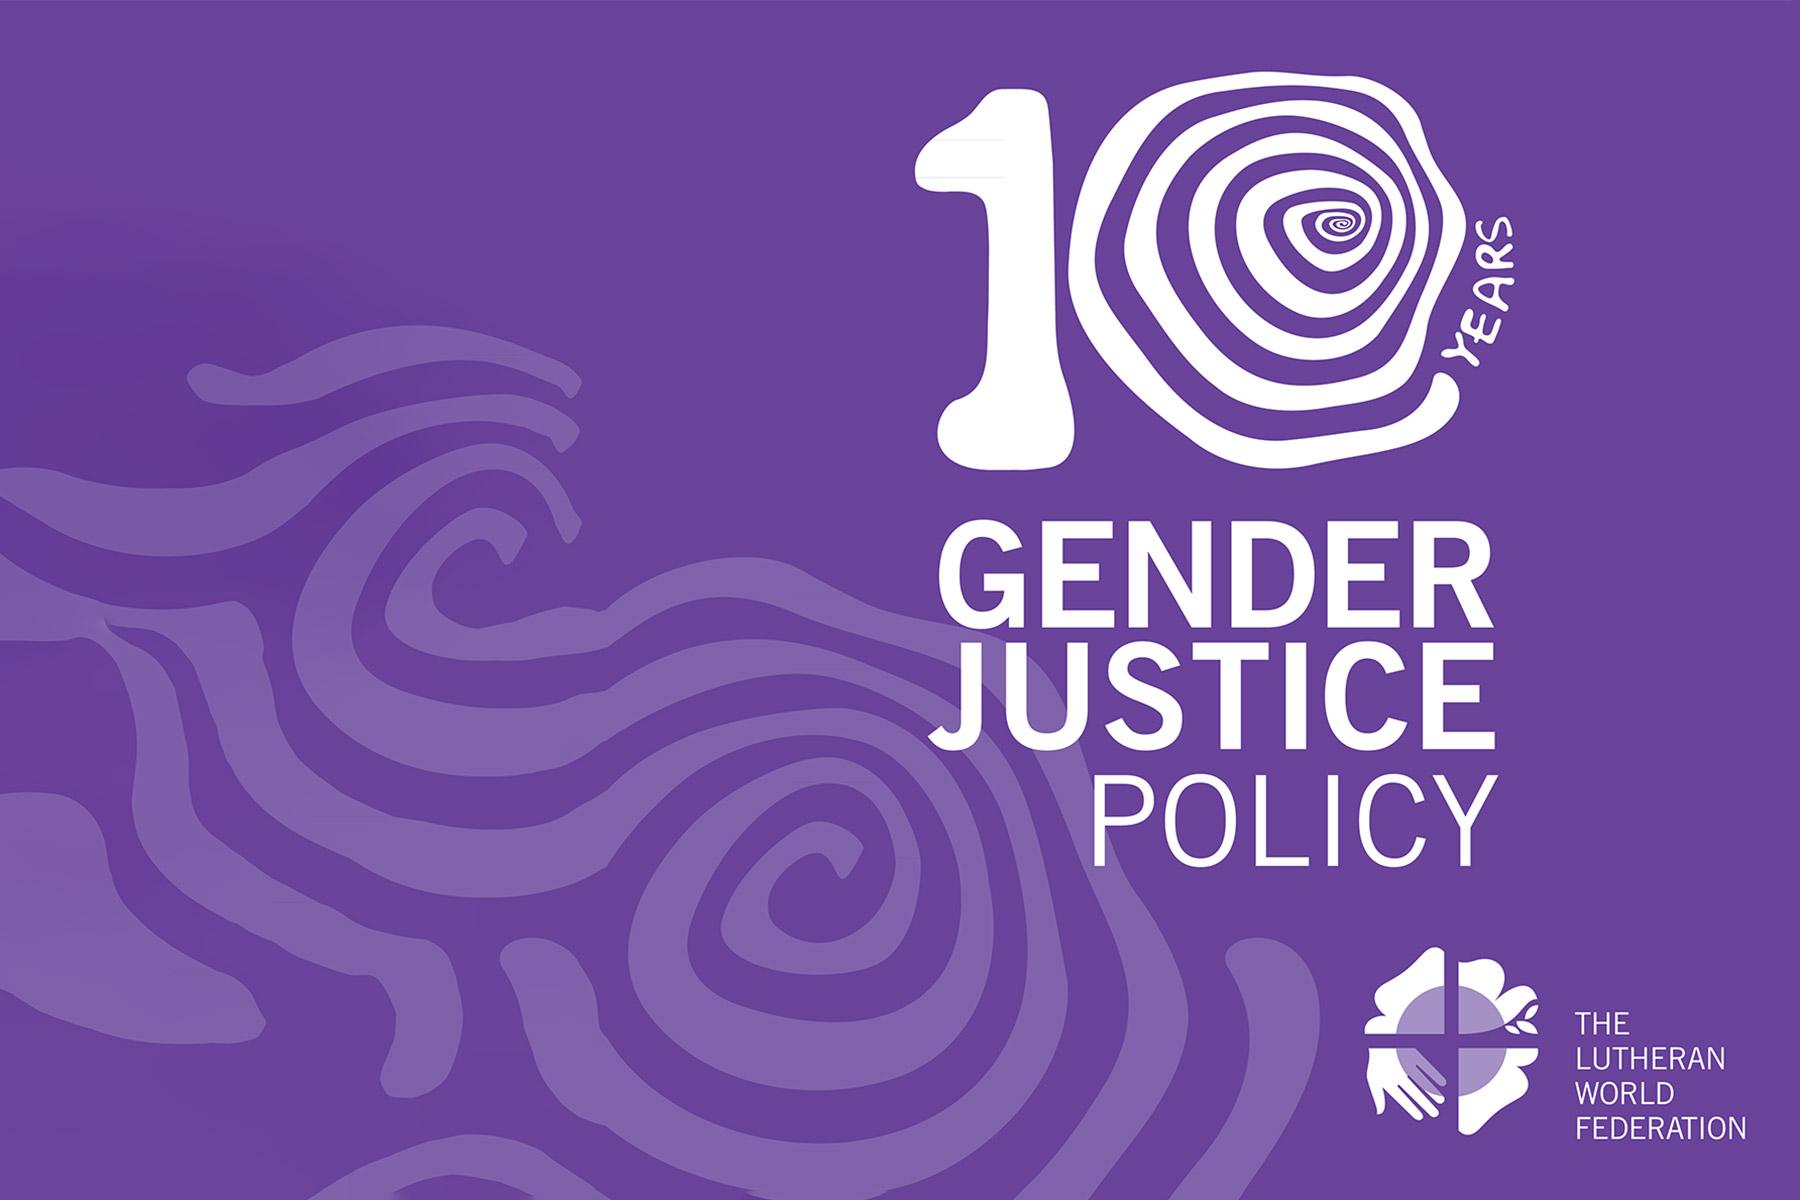 Ten years of Gender Justice Policy